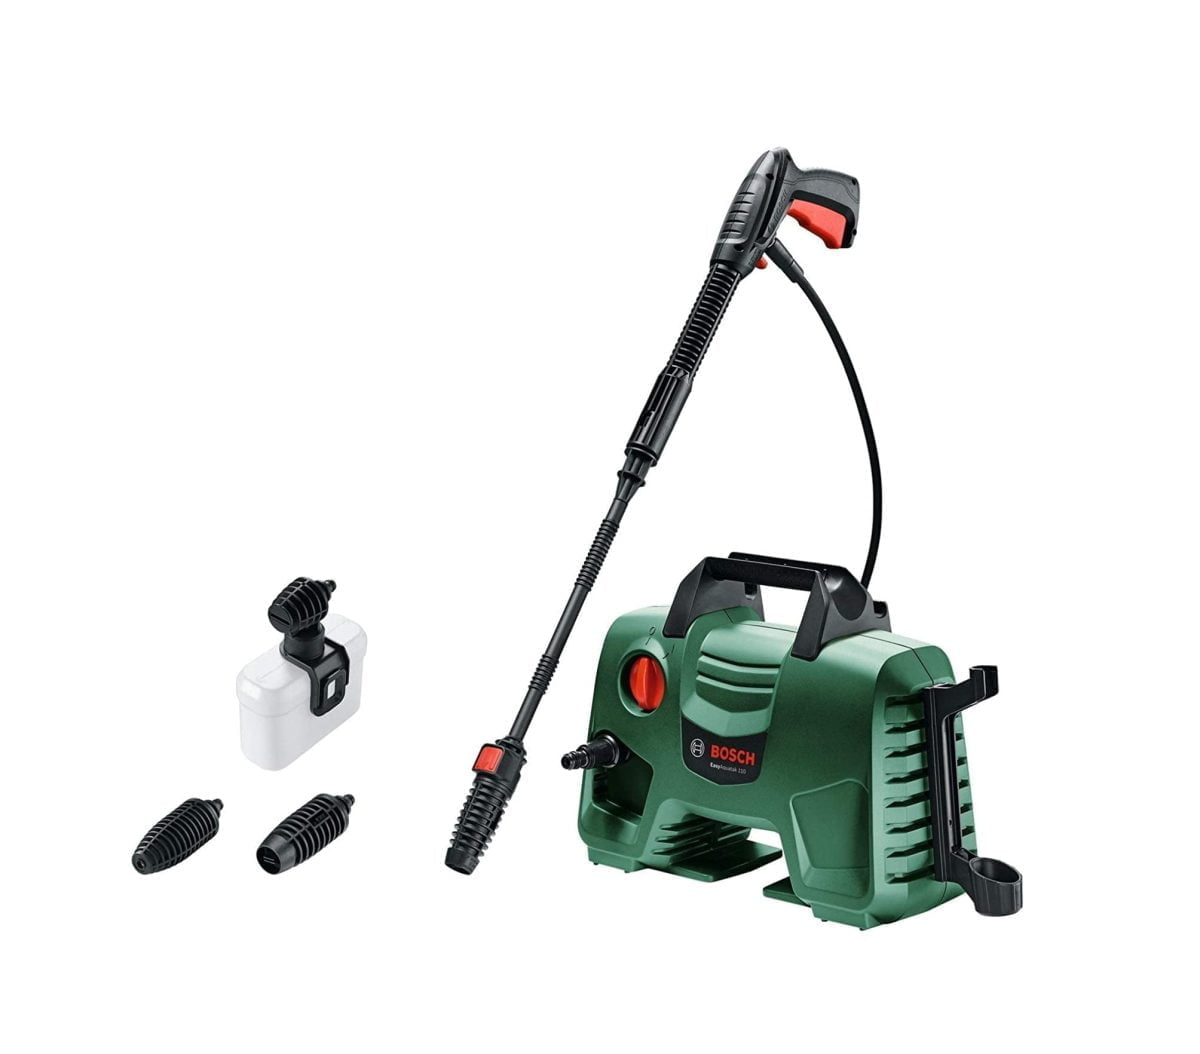 71E0Odjw4Vl. Ac Sl1500 Bosch &Lt;H1 Class=&Quot;Product-Title&Quot;&Gt;Bosch Easyaquatak 100 Long Lance Pressure Washer (1200 W) 100 Bar&Lt;/H1&Gt; &Lt;Div Class=&Quot;Col-Sm-6 Col-Md-12&Quot;&Gt; &Lt;Div Class=&Quot;O-Pthg-Productstage__Product-Summary H6&Quot;&Gt; &Lt;Div Class=&Quot;O-Pthg-Productstage__Product-Summary H6&Quot;&Gt;Compact And Quick For Effortless Cleaning Performance&Lt;/Div&Gt; &Lt;Ul Class=&Quot;A-List A-List--Unordered&Quot;&Gt; &Lt;Li Class=&Quot;A-List__Item&Quot;&Gt; &Lt;Div Class=&Quot;A-Text-Richtext&Quot;&Gt;Compact Design Allows Easy Maneuverability For Quick Cleaning Job&Lt;/Div&Gt;&Lt;/Li&Gt; &Lt;Li Class=&Quot;A-List__Item&Quot;&Gt; &Lt;Div Class=&Quot;A-Text-Richtext&Quot;&Gt;Adjustable Nozzle – From A Forceful Jet To Gentle Rinsing&Lt;/Div&Gt;&Lt;/Li&Gt; &Lt;Li Class=&Quot;A-List__Item&Quot;&Gt; &Lt;Div Class=&Quot;A-Text-Richtext&Quot;&Gt;Push-Fit Connections For Ultimate Convenience&Lt;/Div&Gt;&Lt;/Li&Gt; &Lt;Li Class=&Quot;A-List__Item&Quot;&Gt; &Lt;Div Class=&Quot;A-Text-Richtext&Quot;&Gt;Easily Tackle Small-To-Medium-Sized Cleaning Tasks&Lt;/Div&Gt;&Lt;/Li&Gt; &Lt;/Ul&Gt; Model 00600 8A7 E71 Is &Lt;/Div&Gt; &Lt;/Div&Gt; Bosch Easyaquatak 100 Long Lance Pressure Washer (1200 W) 100 Bar